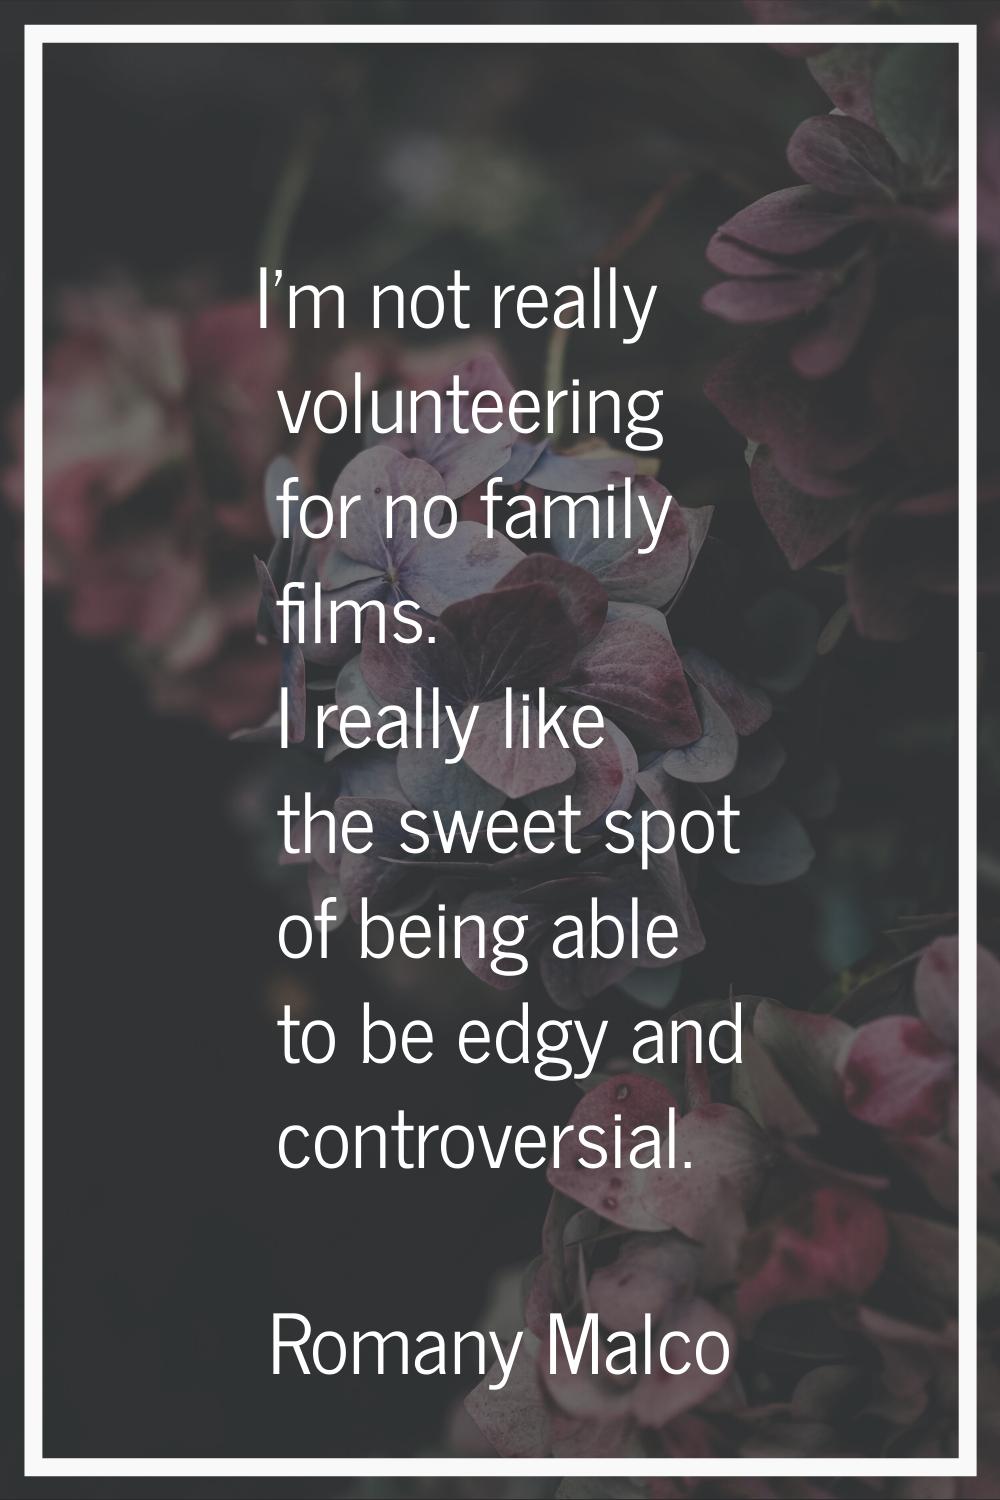 I'm not really volunteering for no family films. I really like the sweet spot of being able to be e